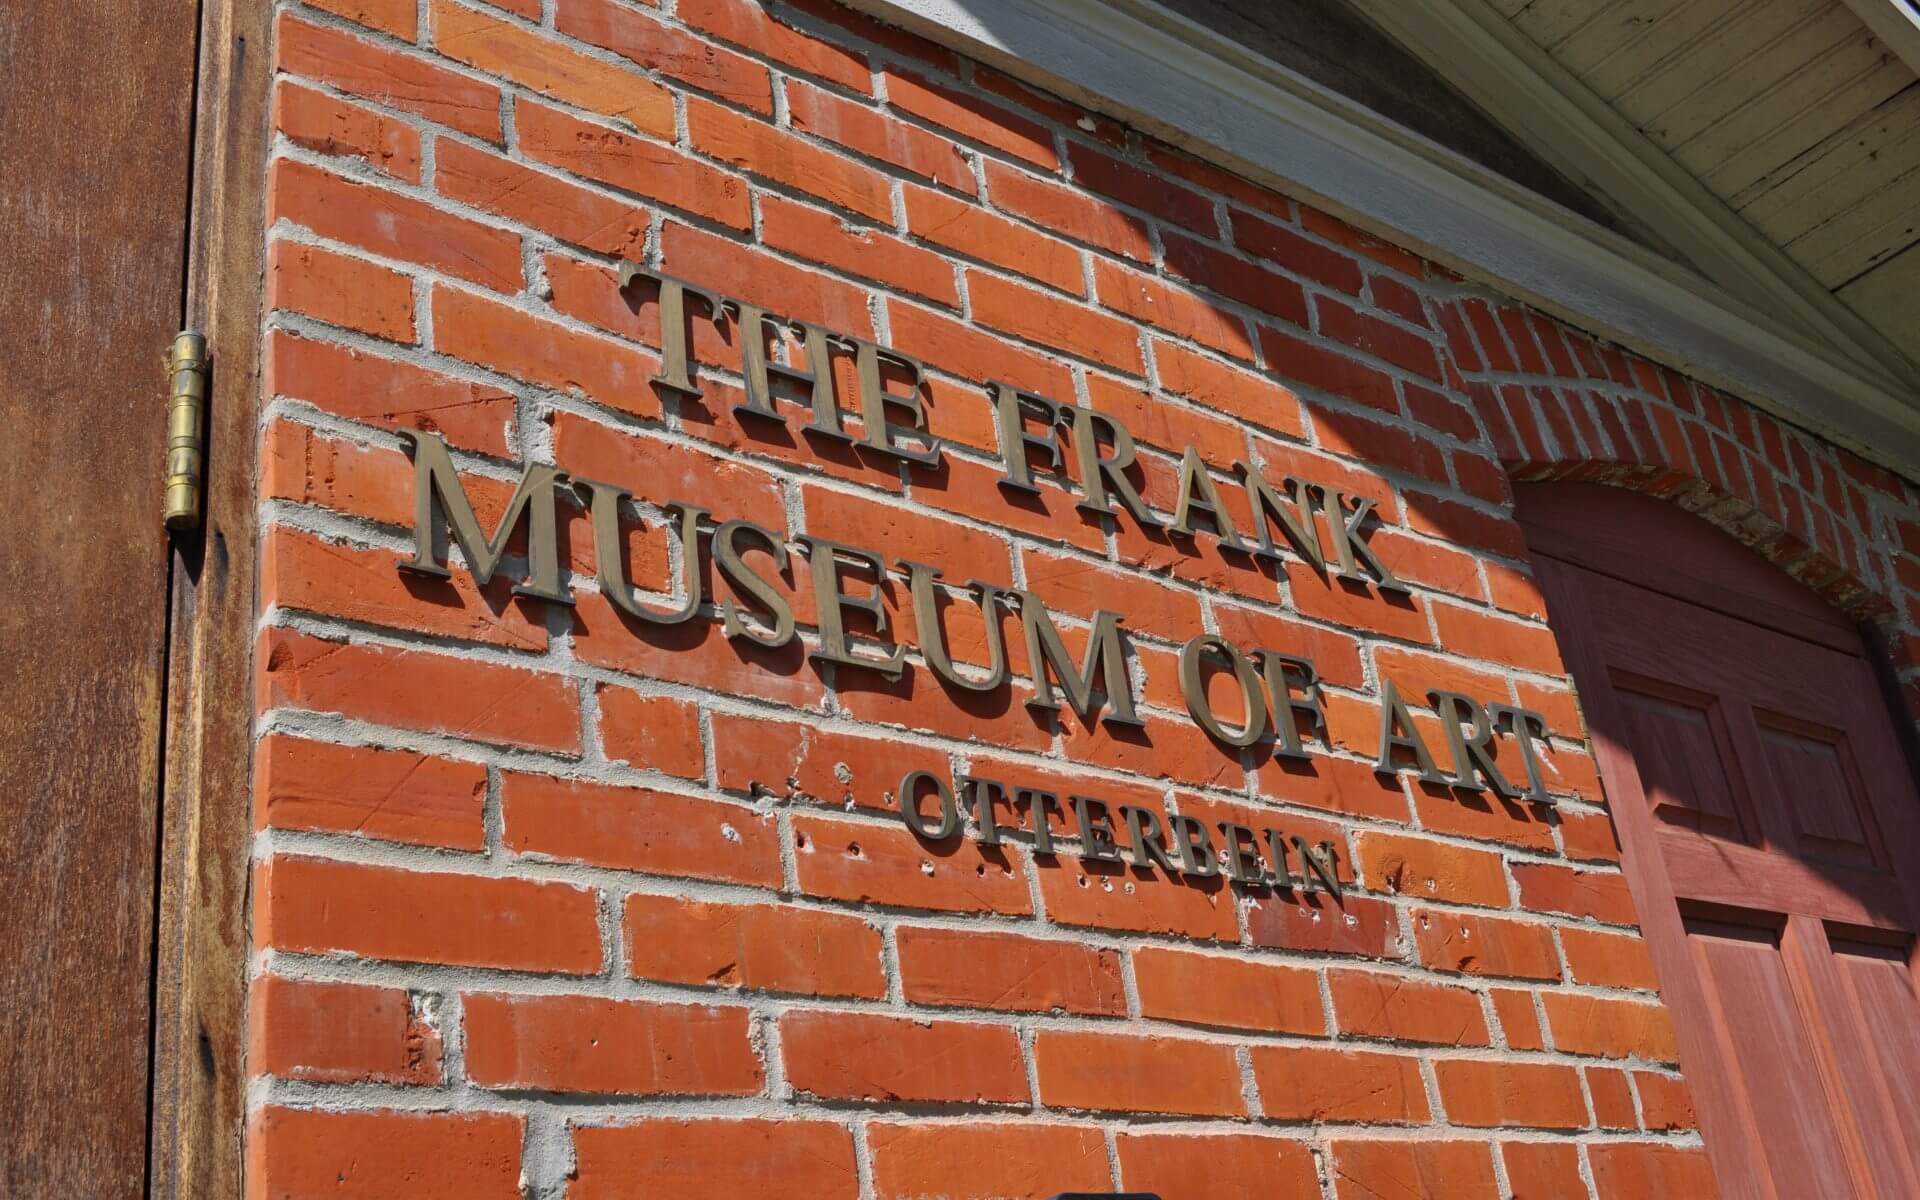 The Frank Museum of Art